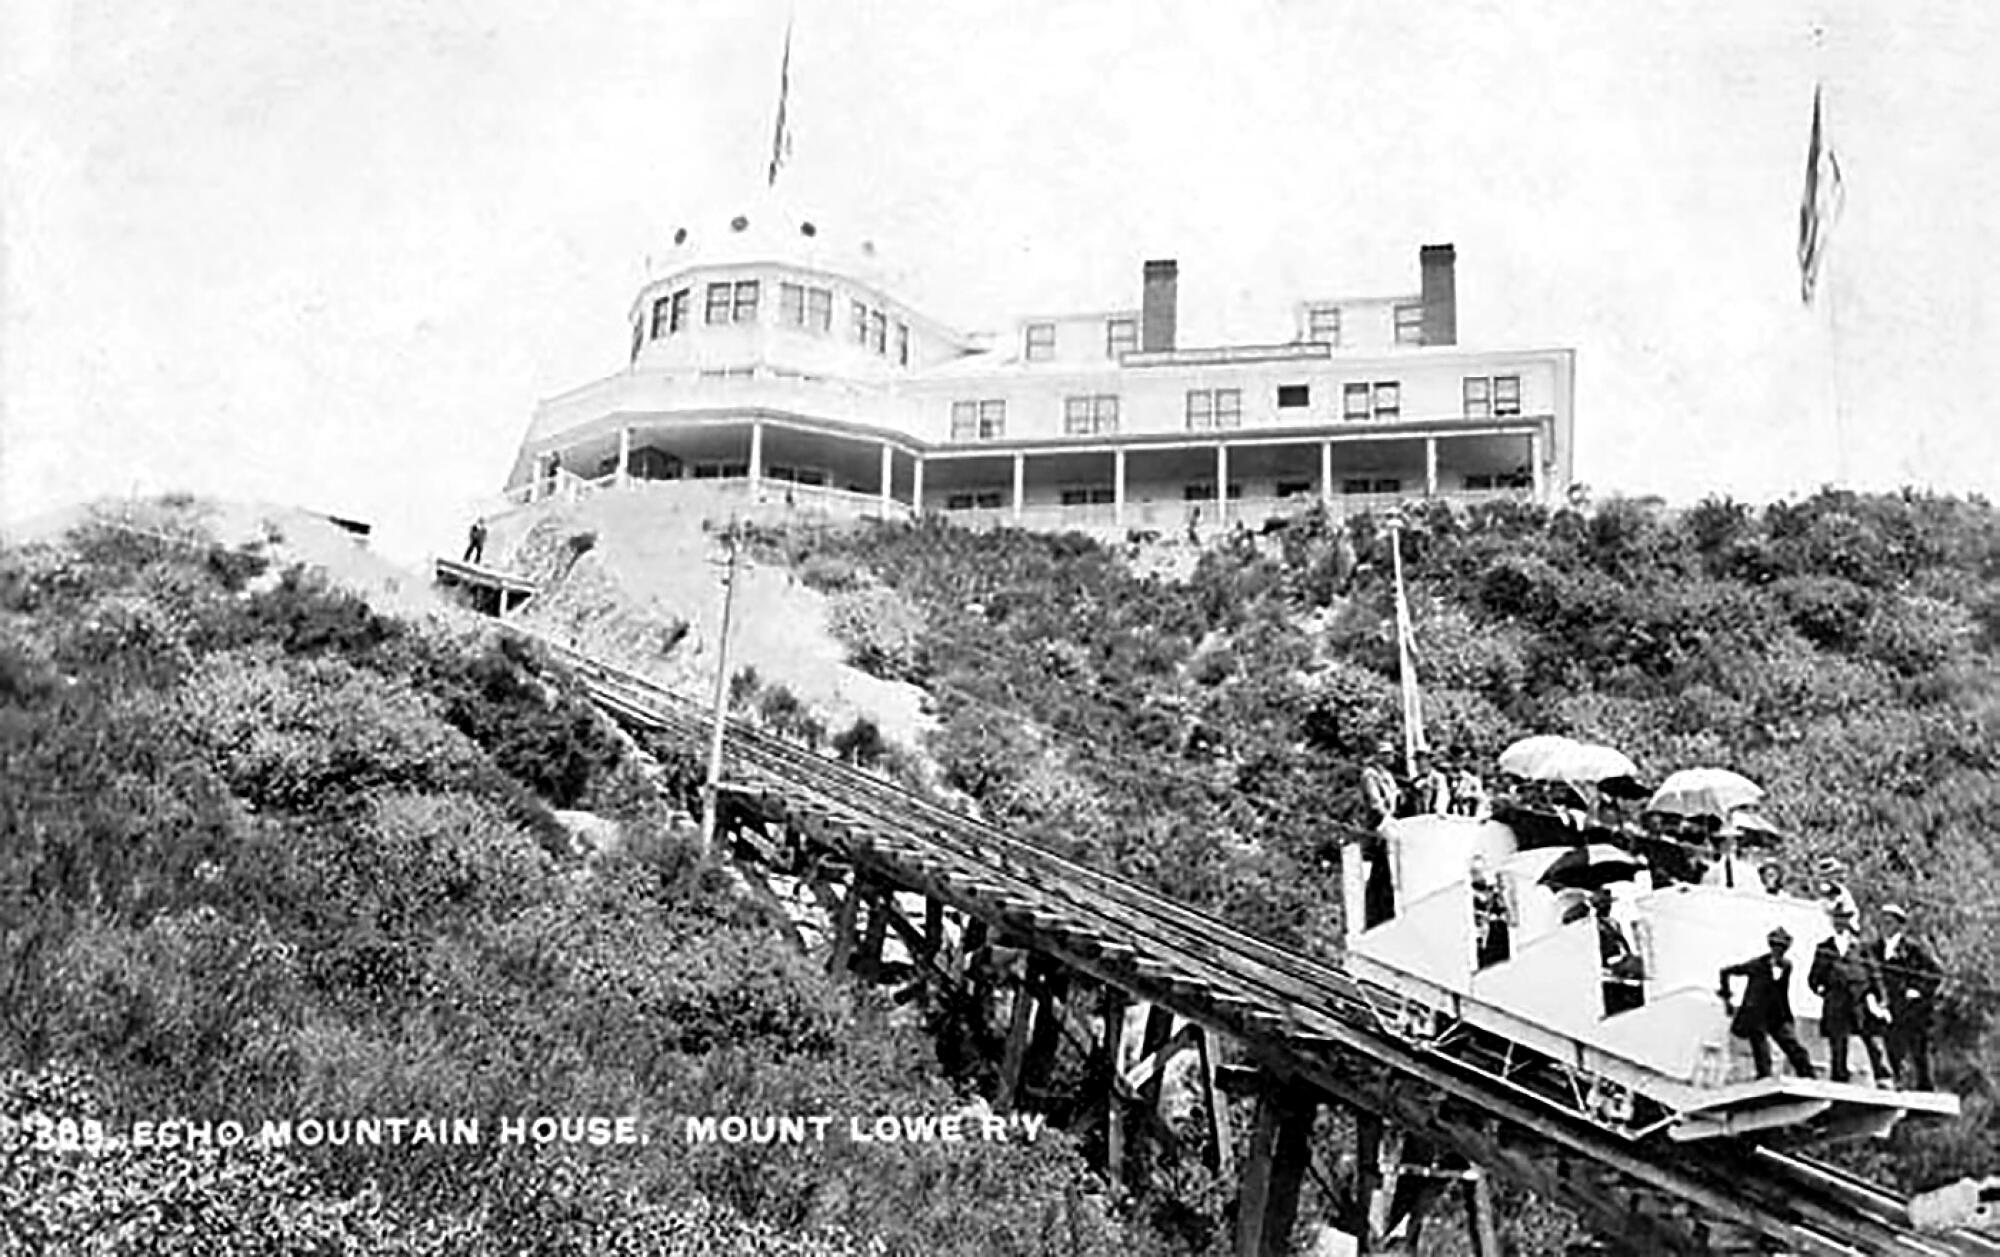 In a vintage photo, an incline car approaches Echo Mountain House.